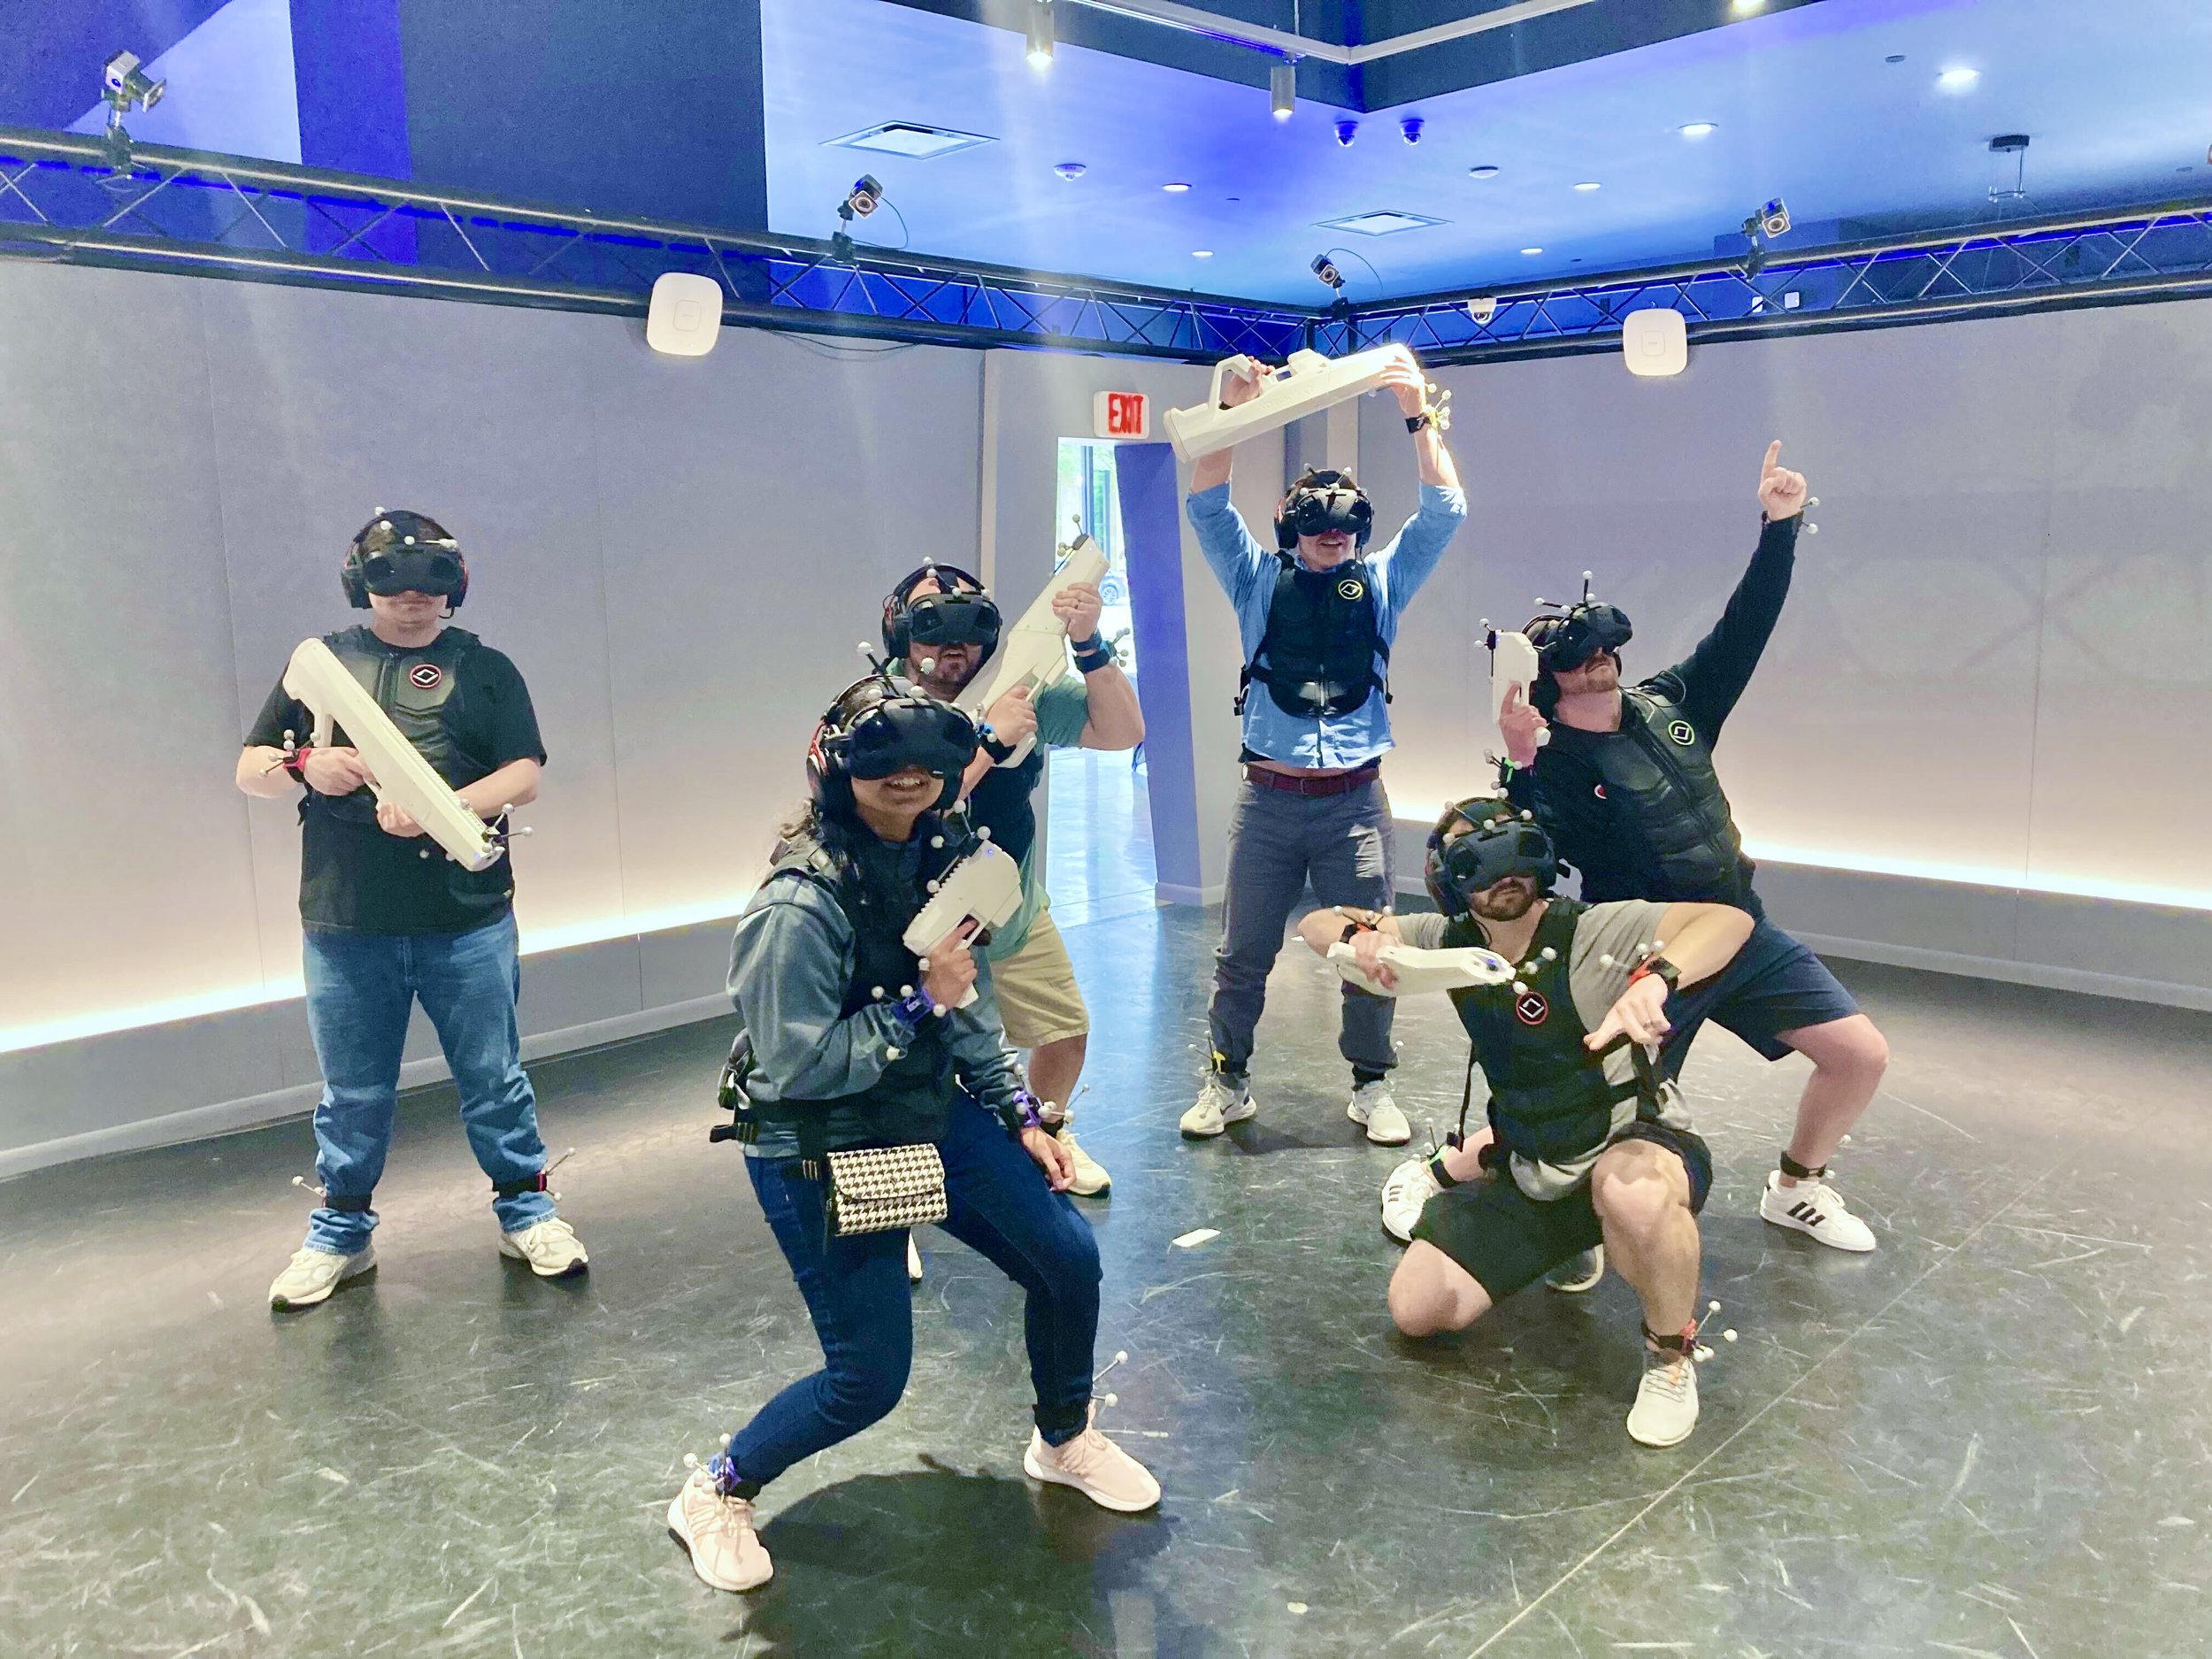 AppOmni team in virtual reality gear for a team experience